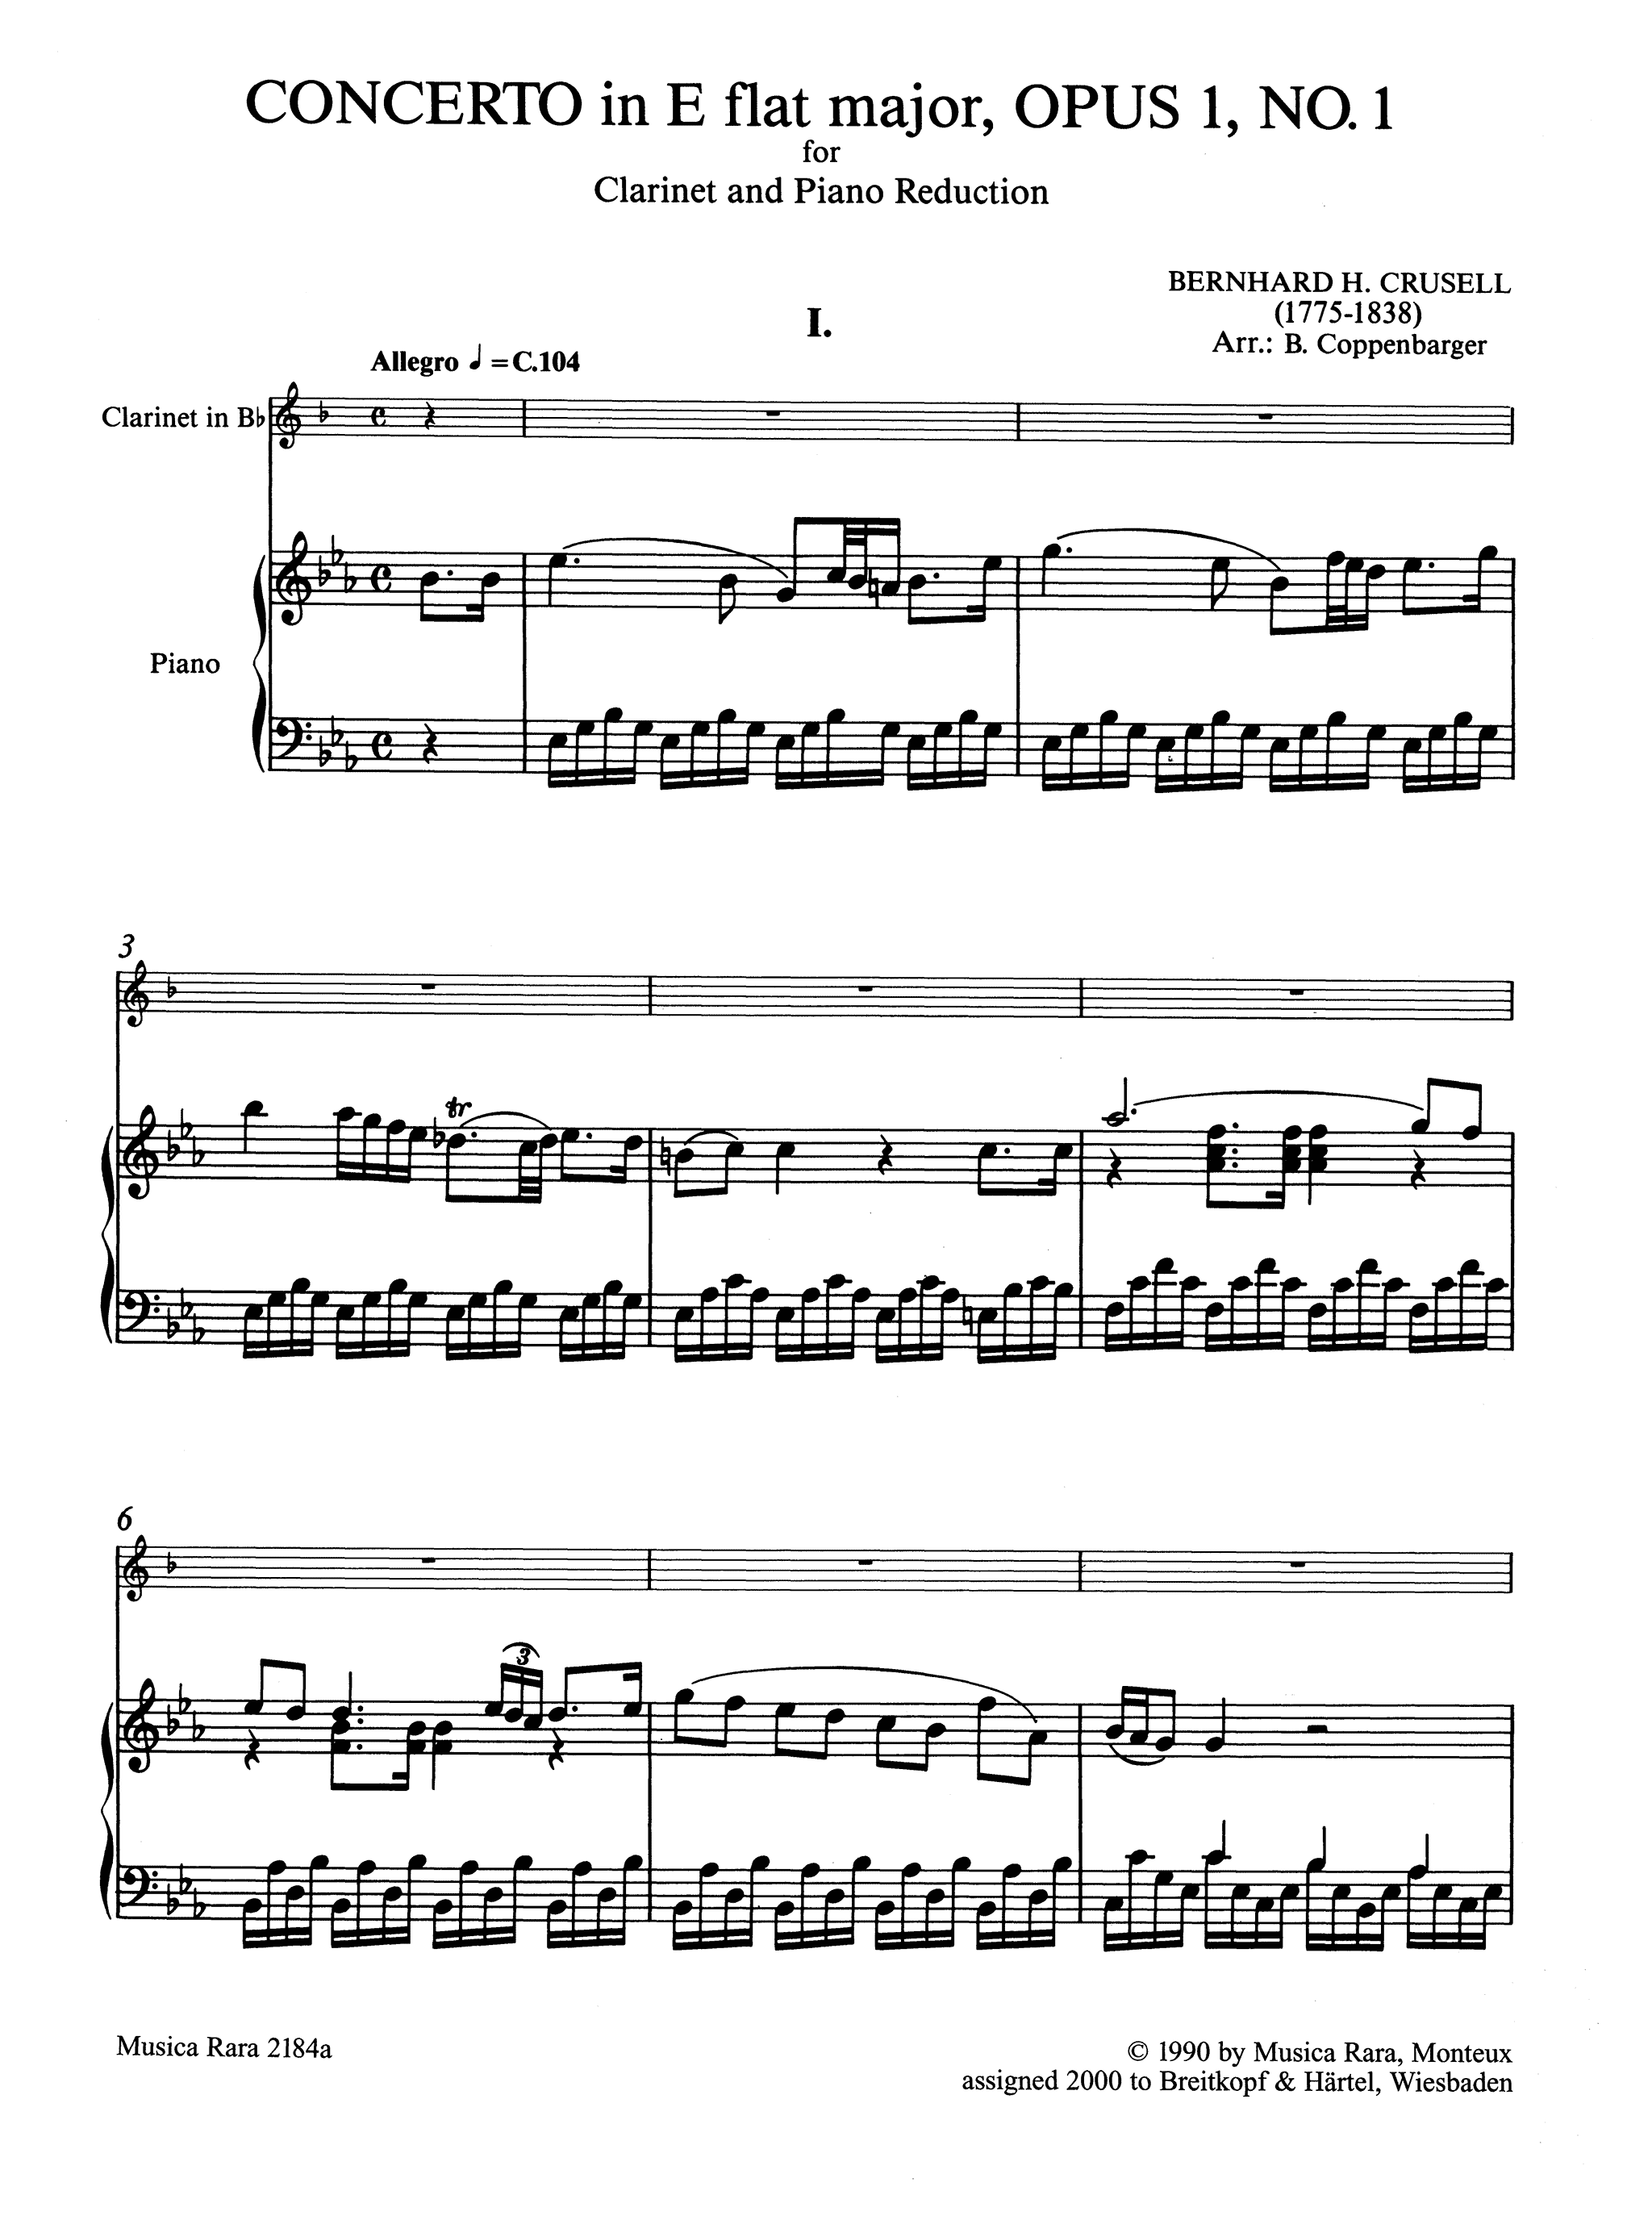 Crusell Clarinet Concerto in E-flat Major, Op. 1 - Movement 1